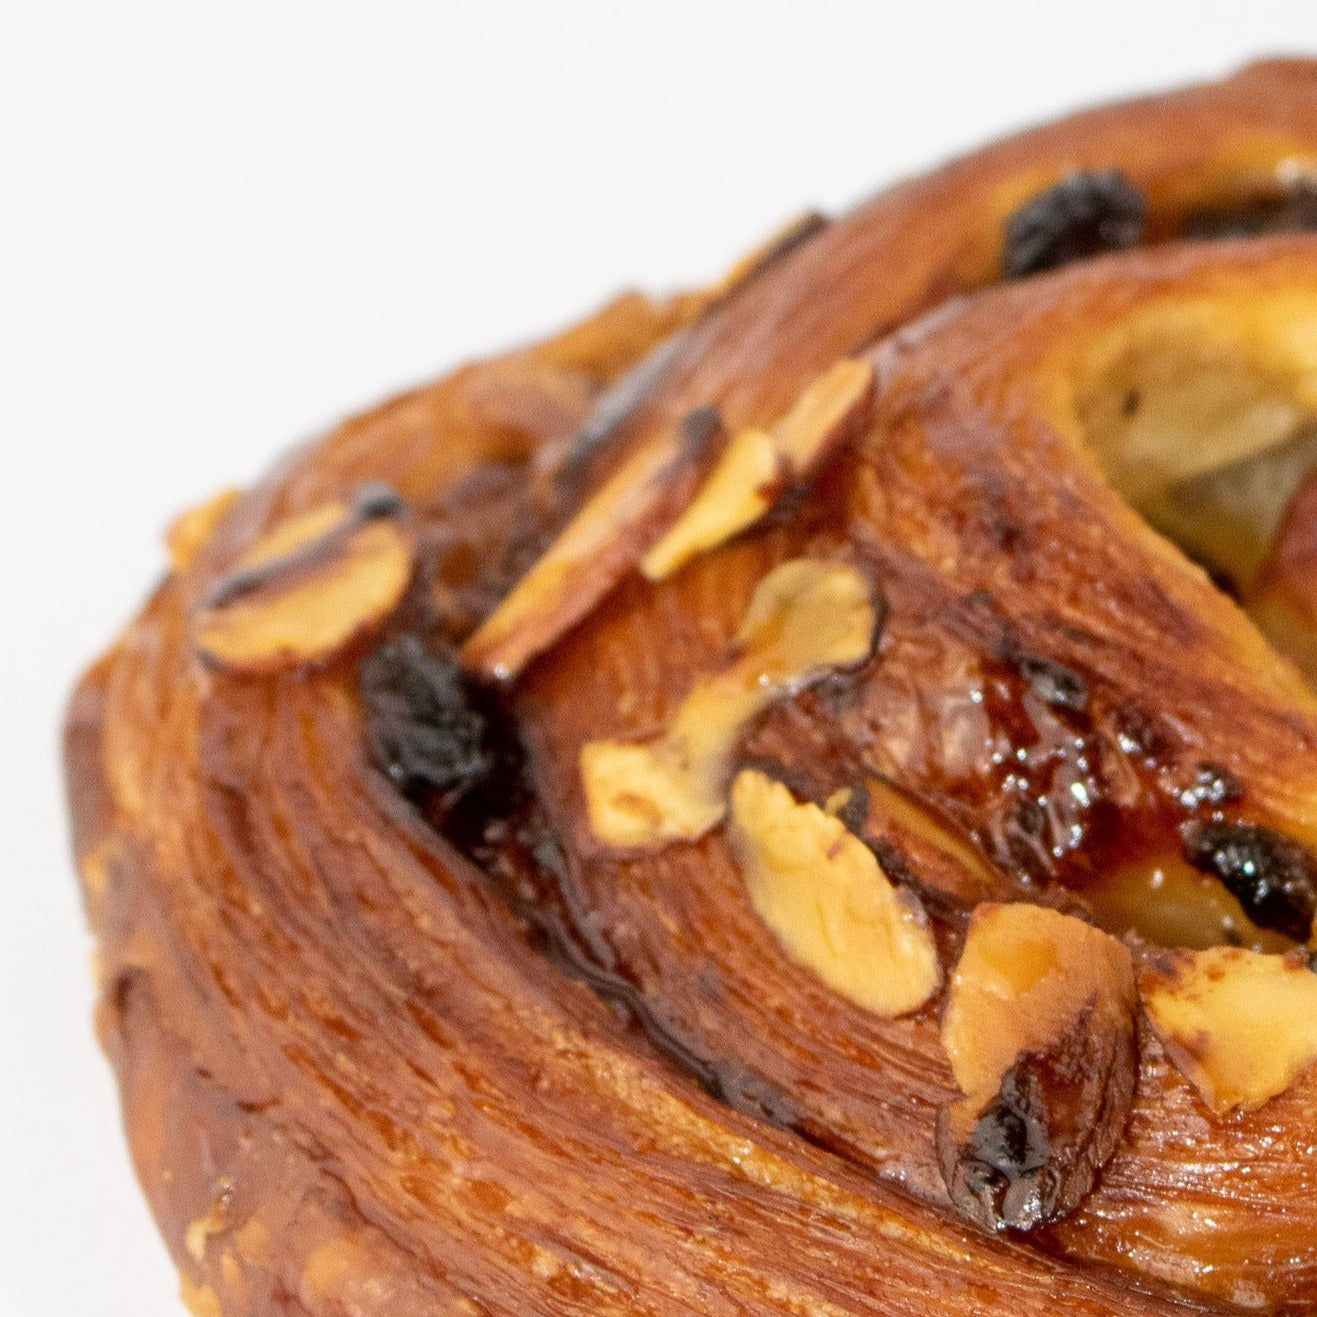 a close up image of the pastry. it shows the detail with almonds and raisins